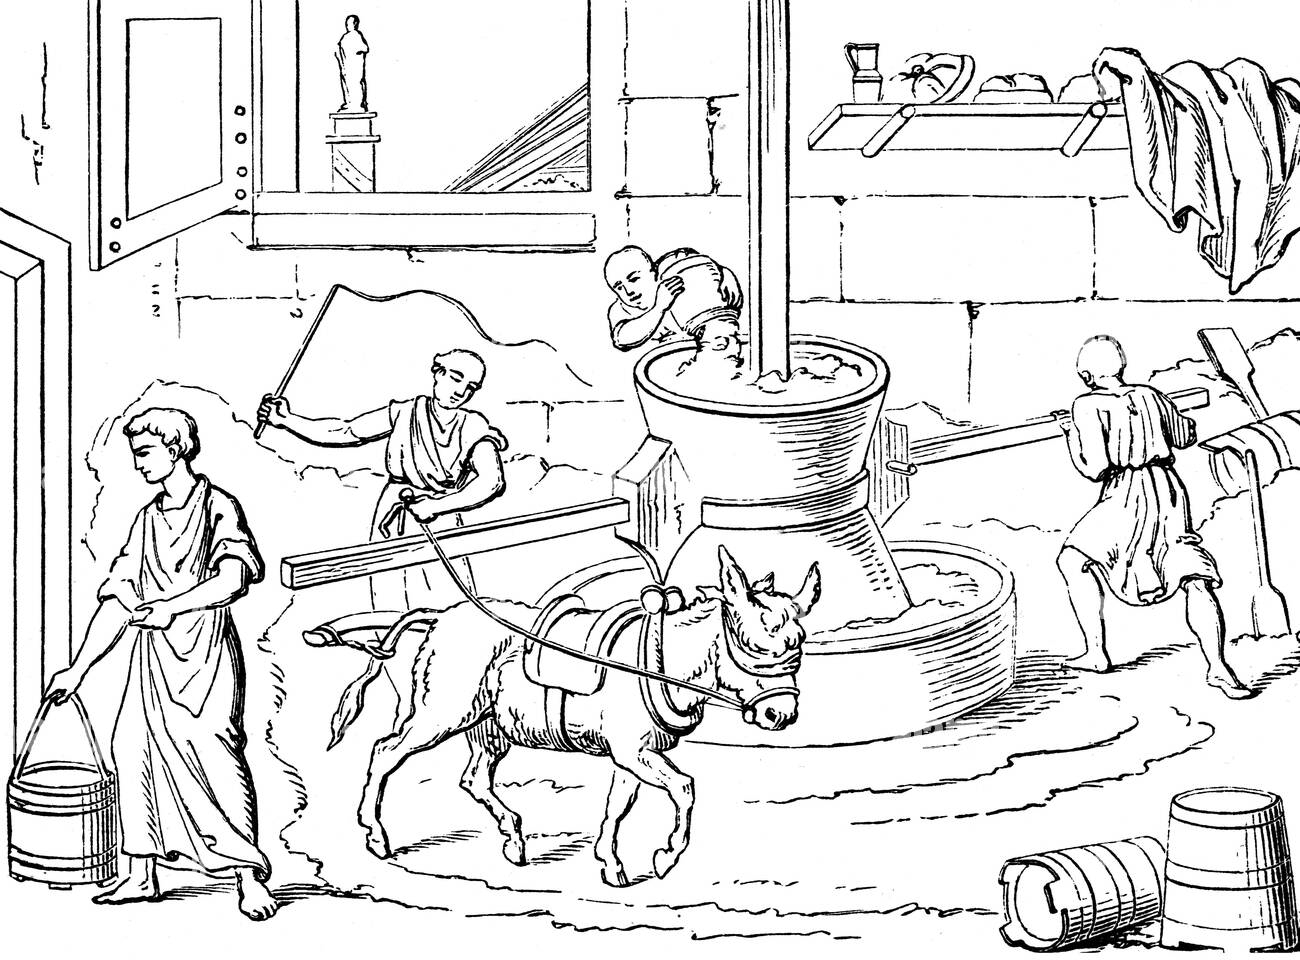 illustration of slaves and donkey working in the prison bakery, moving the millstone to grind flour